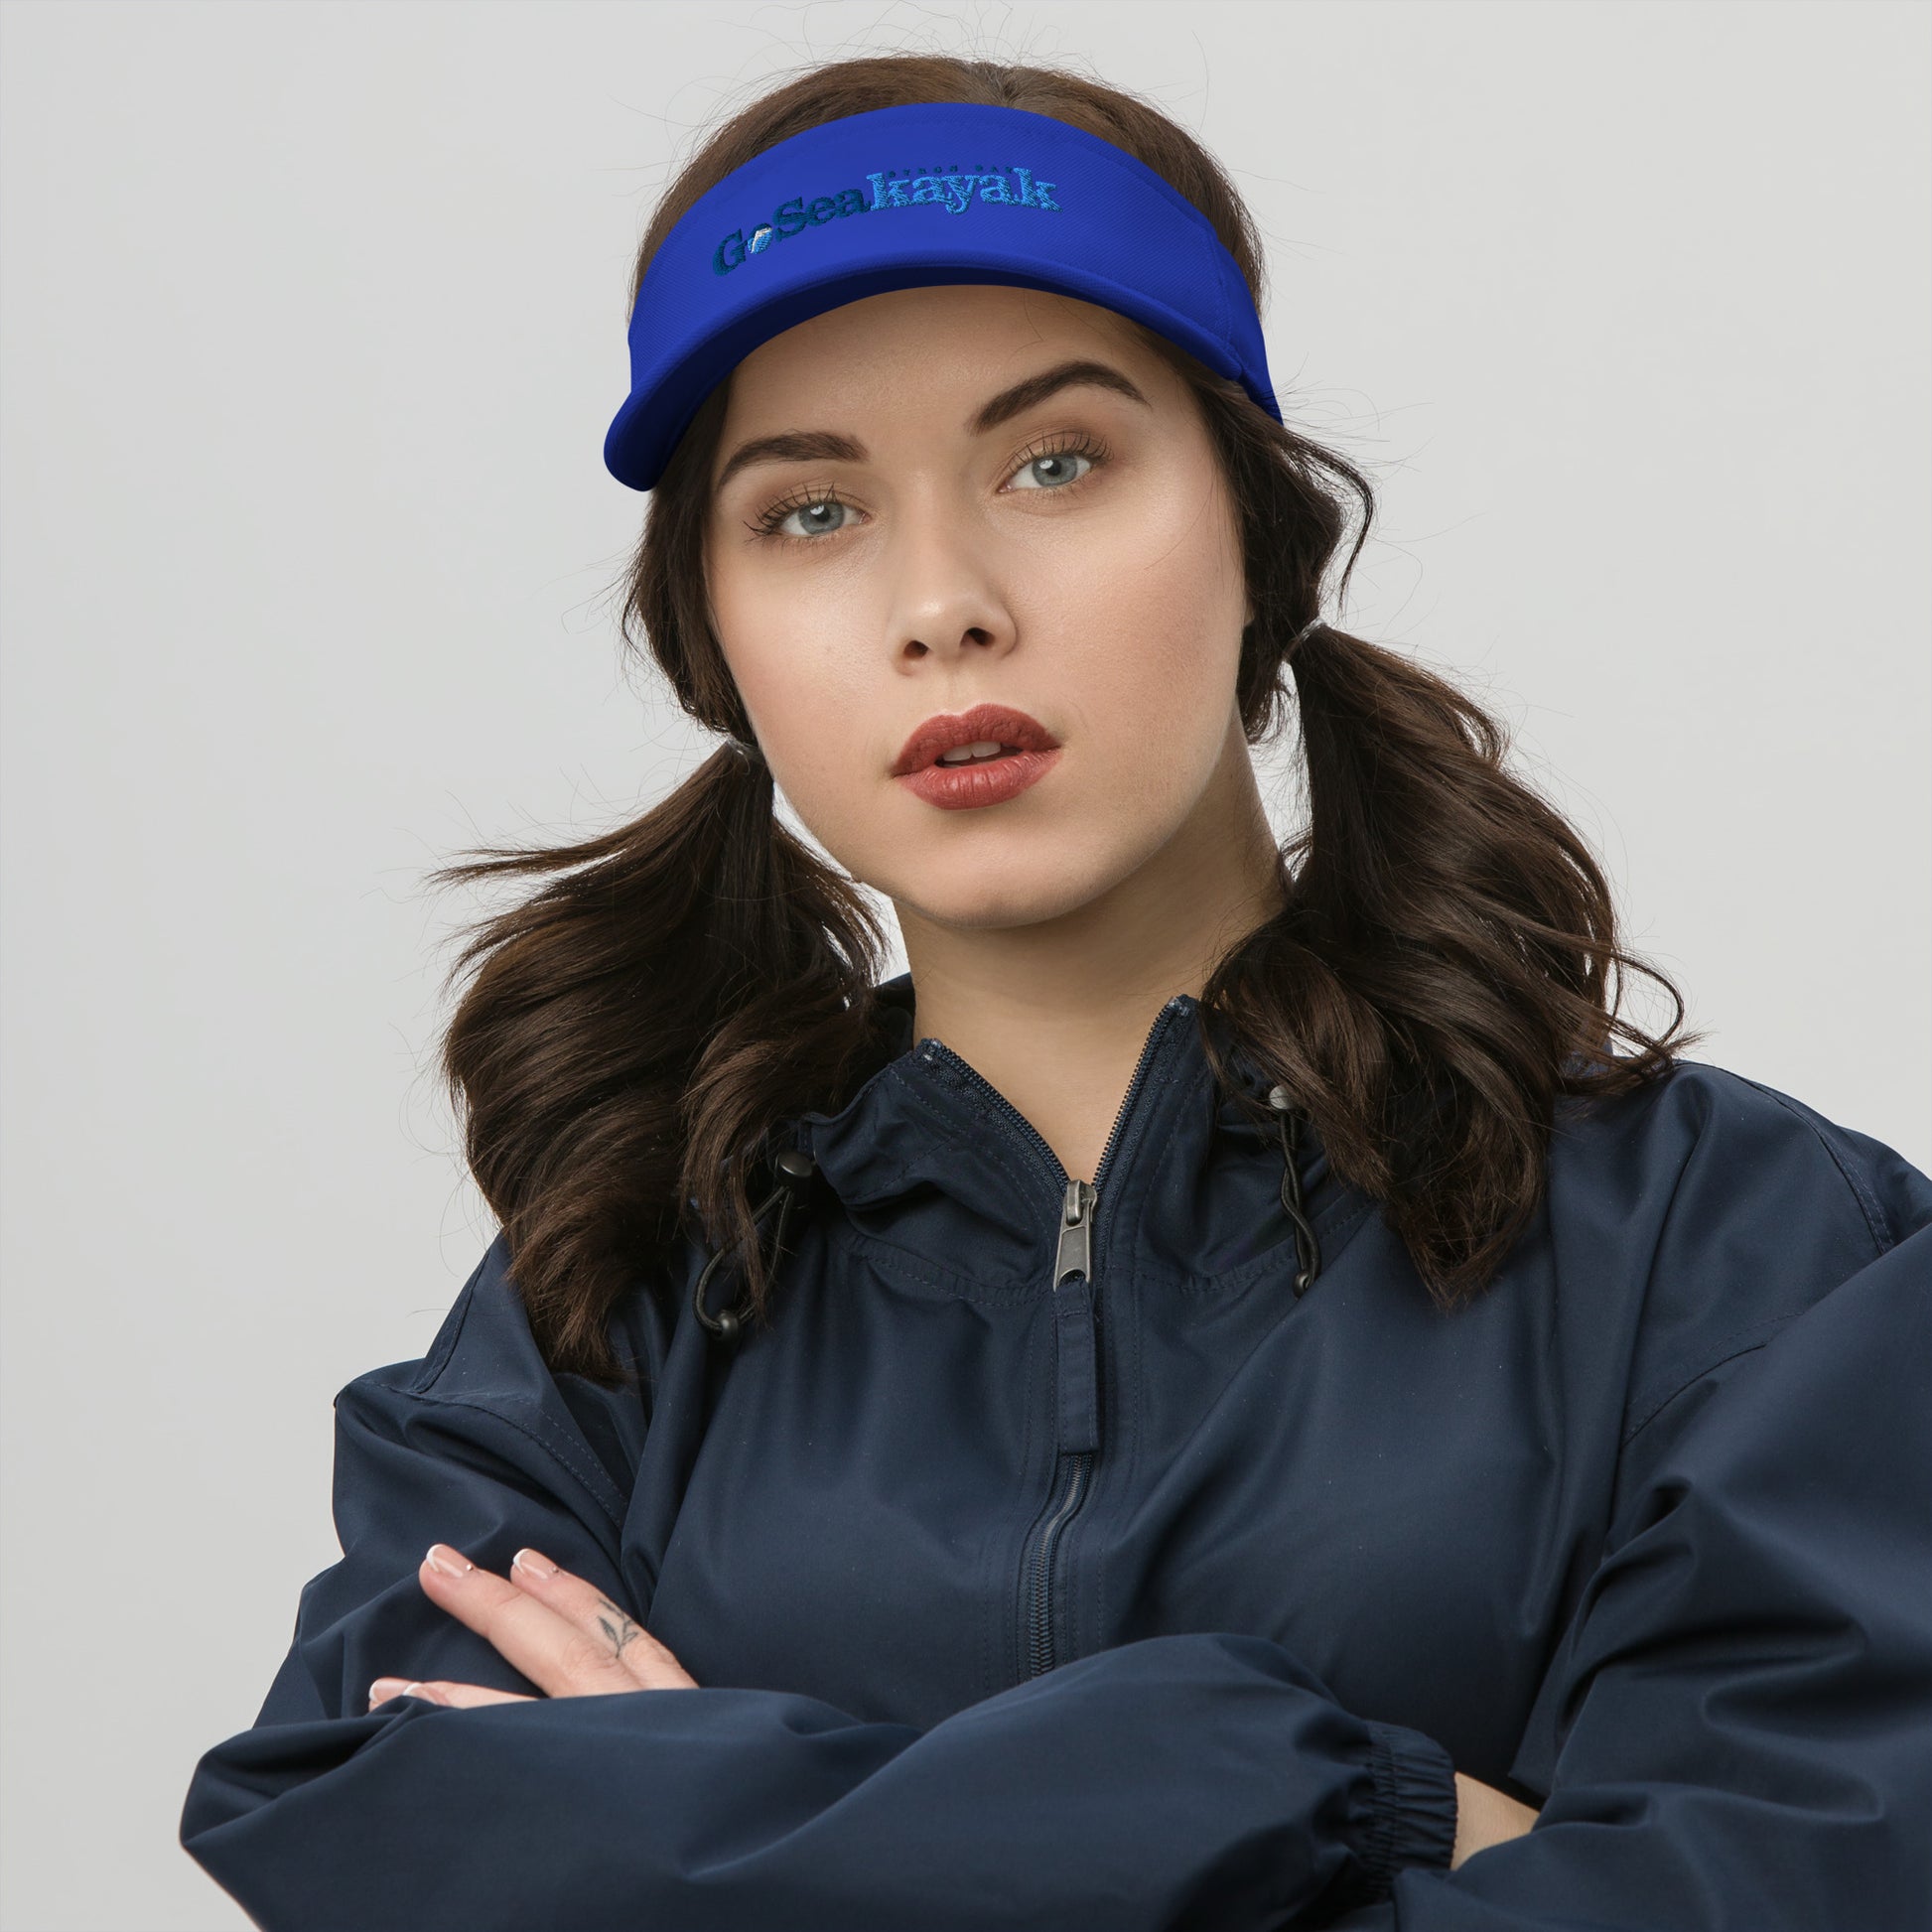  Visor - Royal Blue - Front view, on woman standing with arms crossed - Go Sea Kayak Byron bay logo on front - Genuine Byron Bay Merchandise | Produced by Go Sea Kayak Byron Bay 